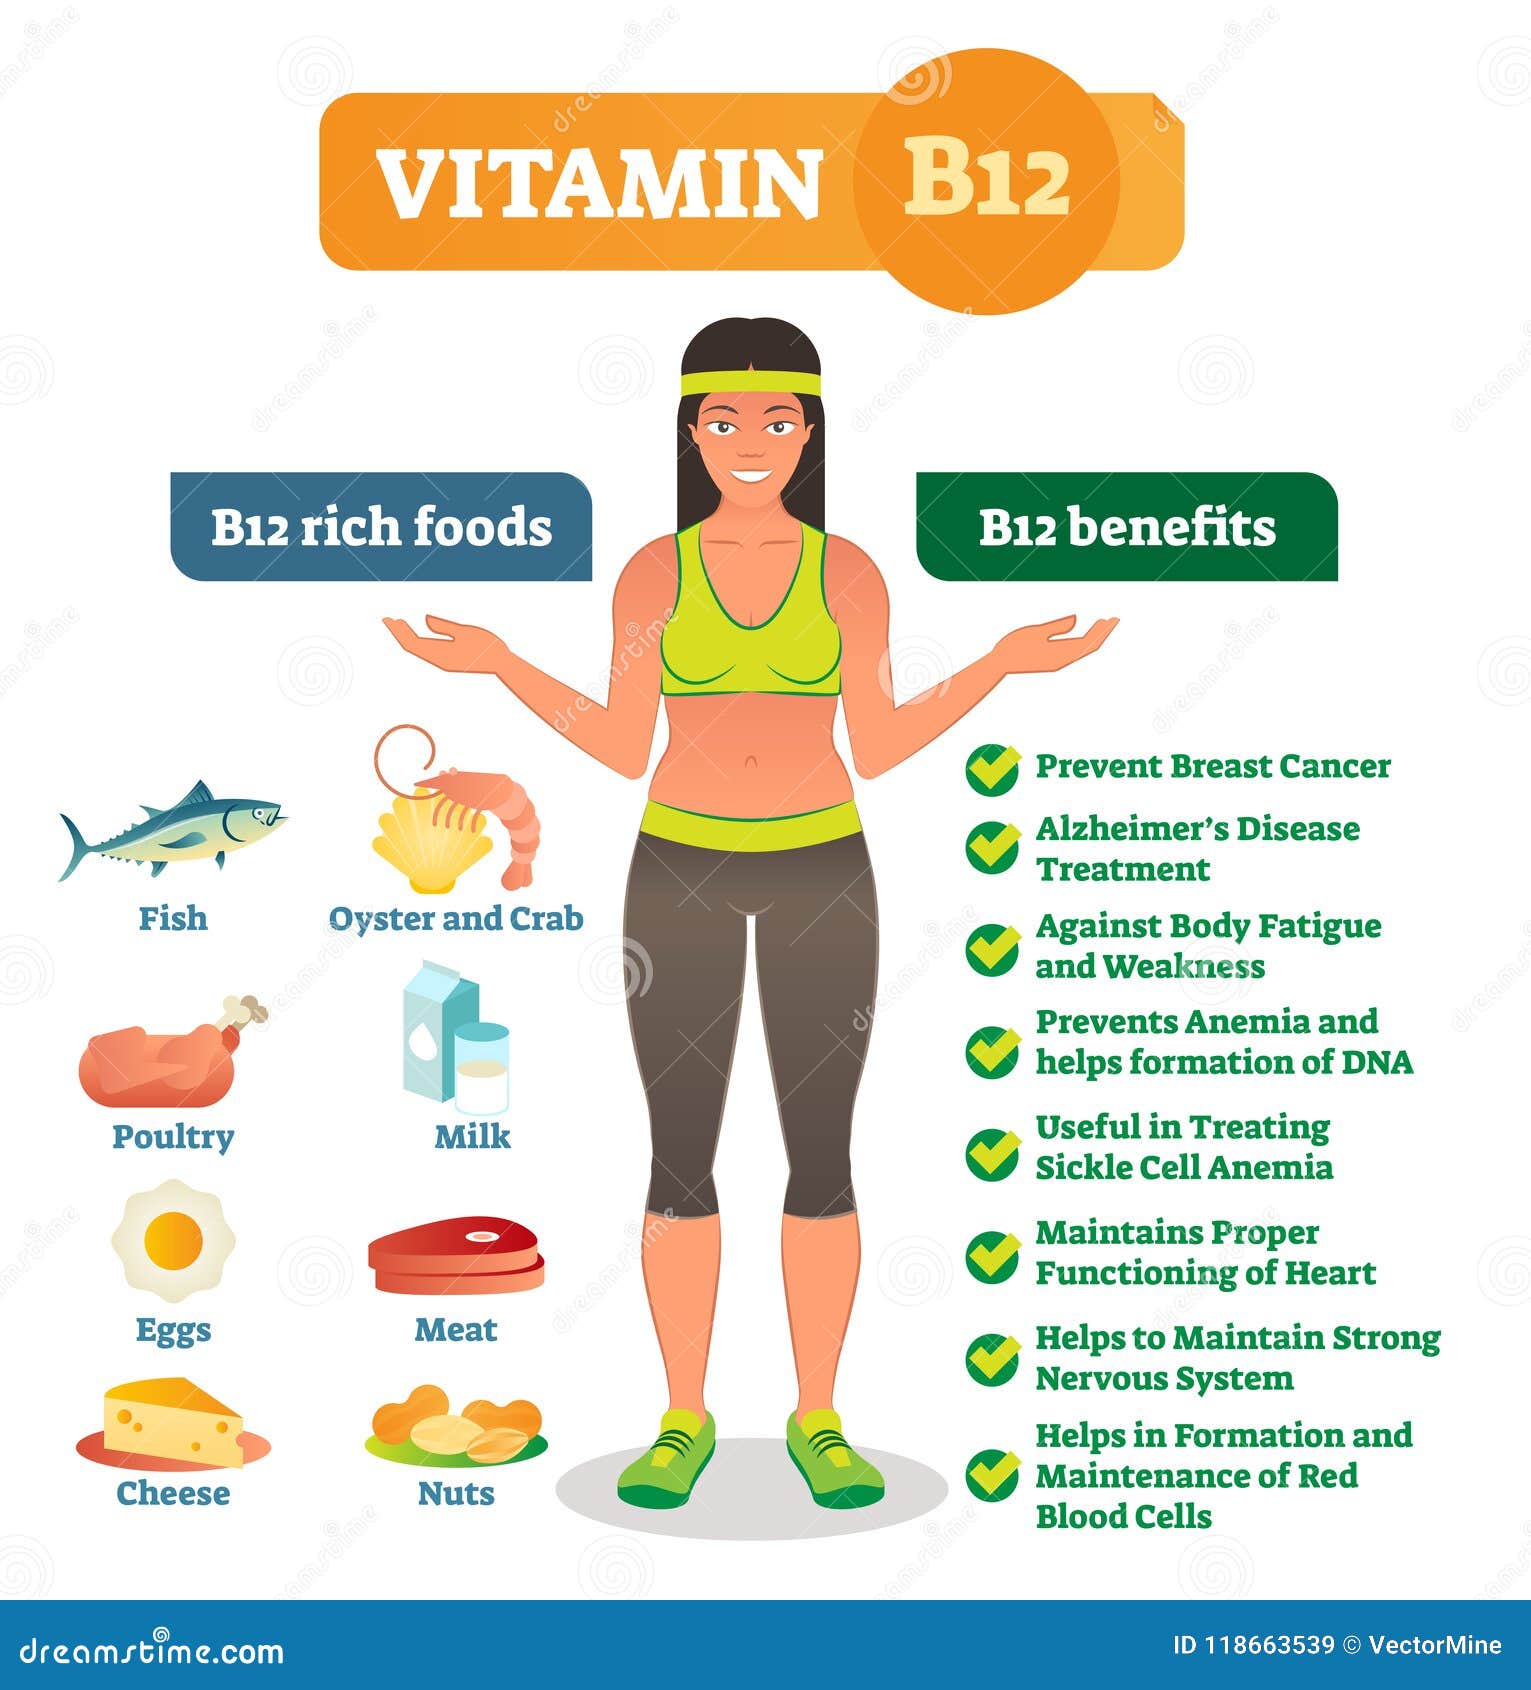 Vitamin B12 Rich Food Icons And Health Benefits List ...